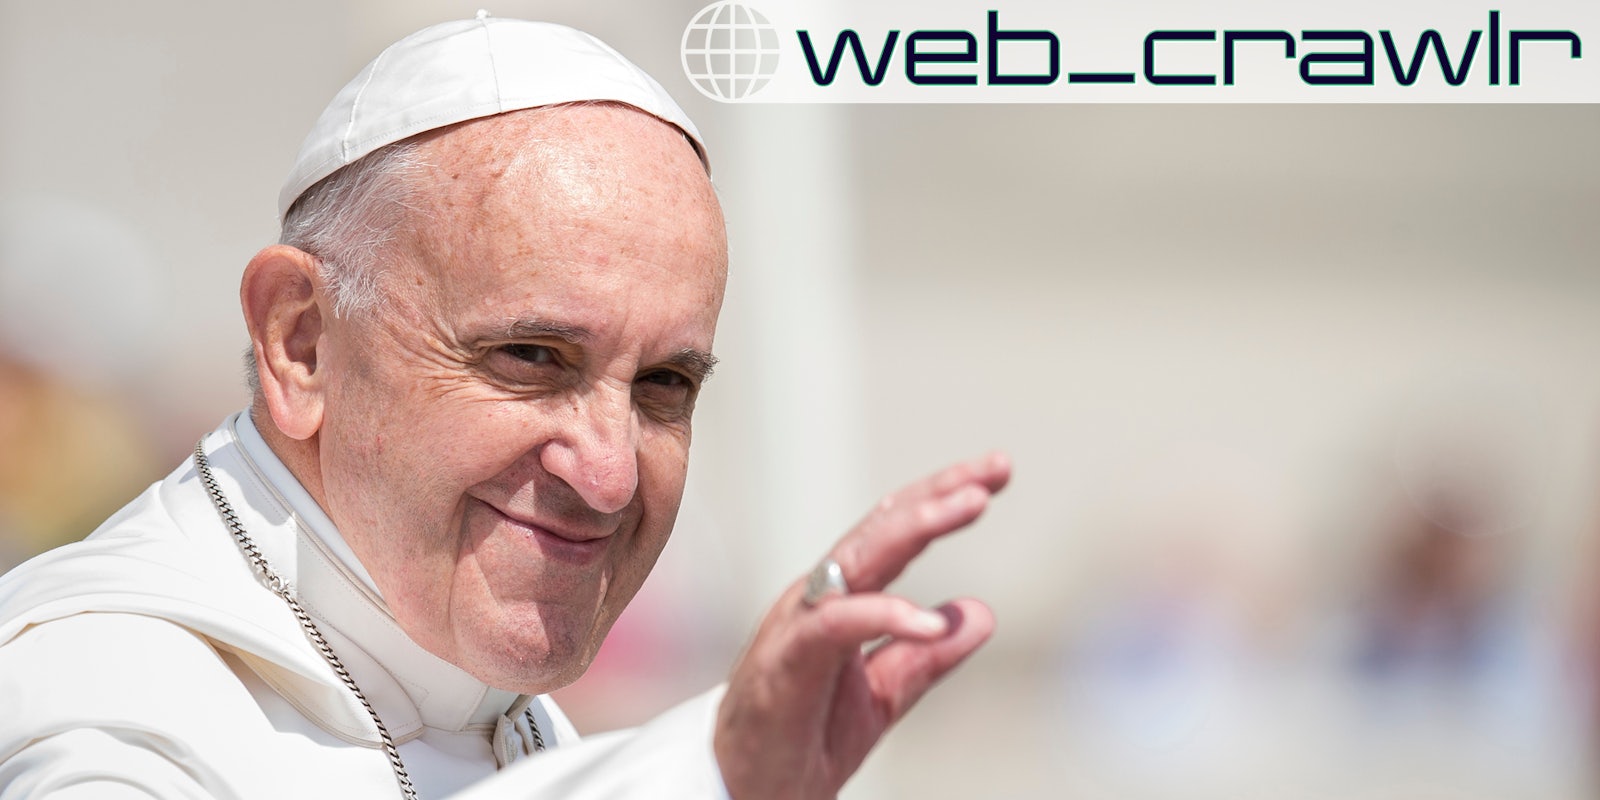 The Pope waving. The Daily Dot newsletter web_crawlr logo is in the top right corner.